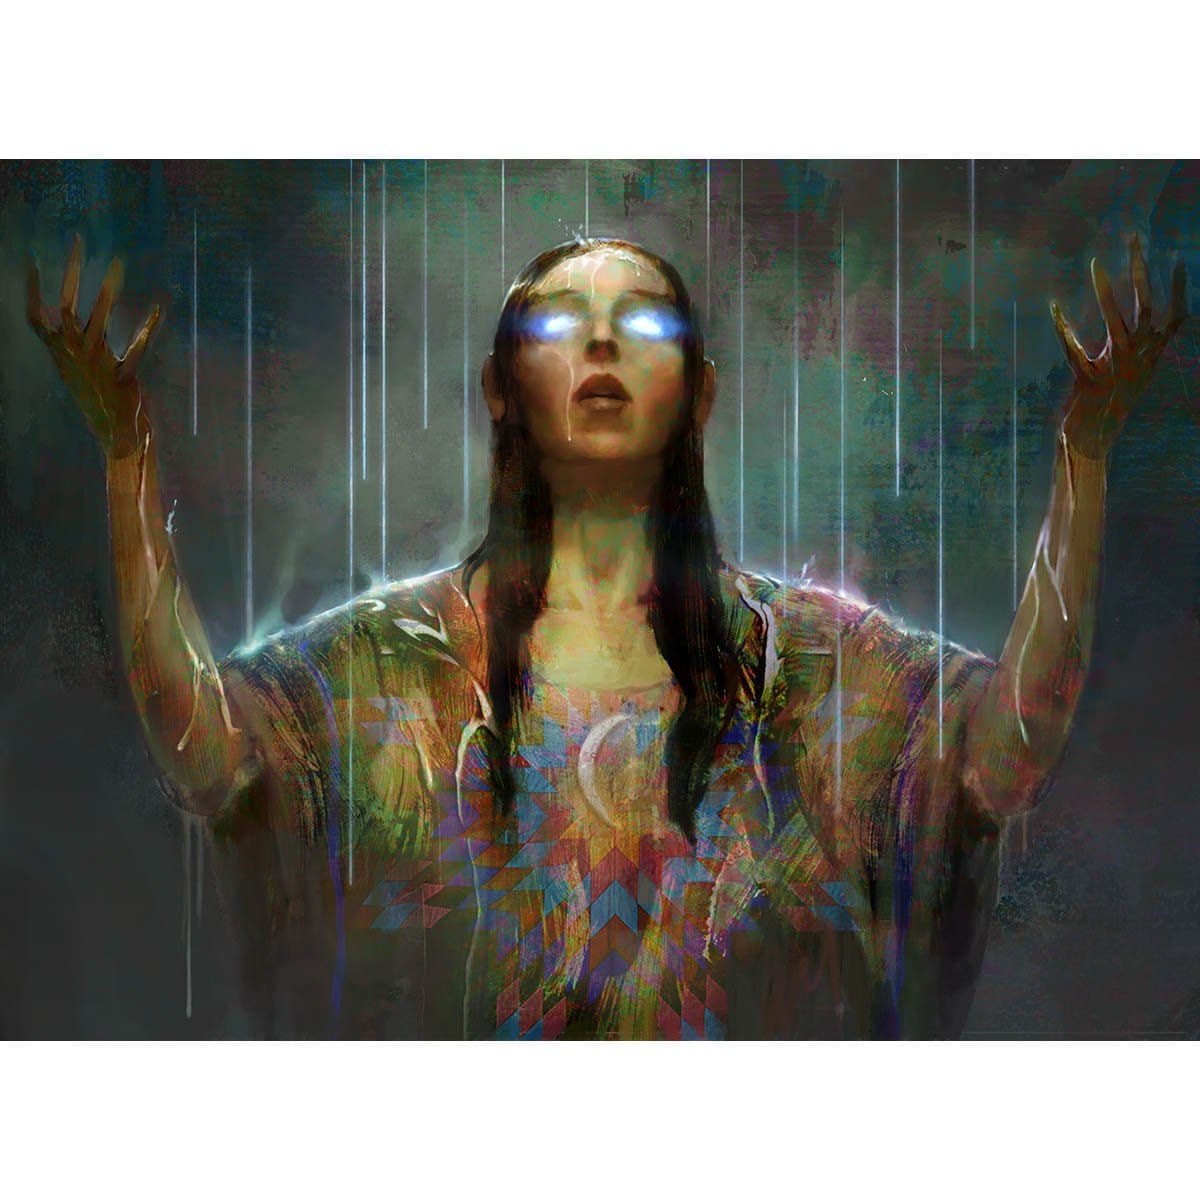 Rain of Revelation Print - Print - Original Magic Art - Accessories for Magic the Gathering and other card games